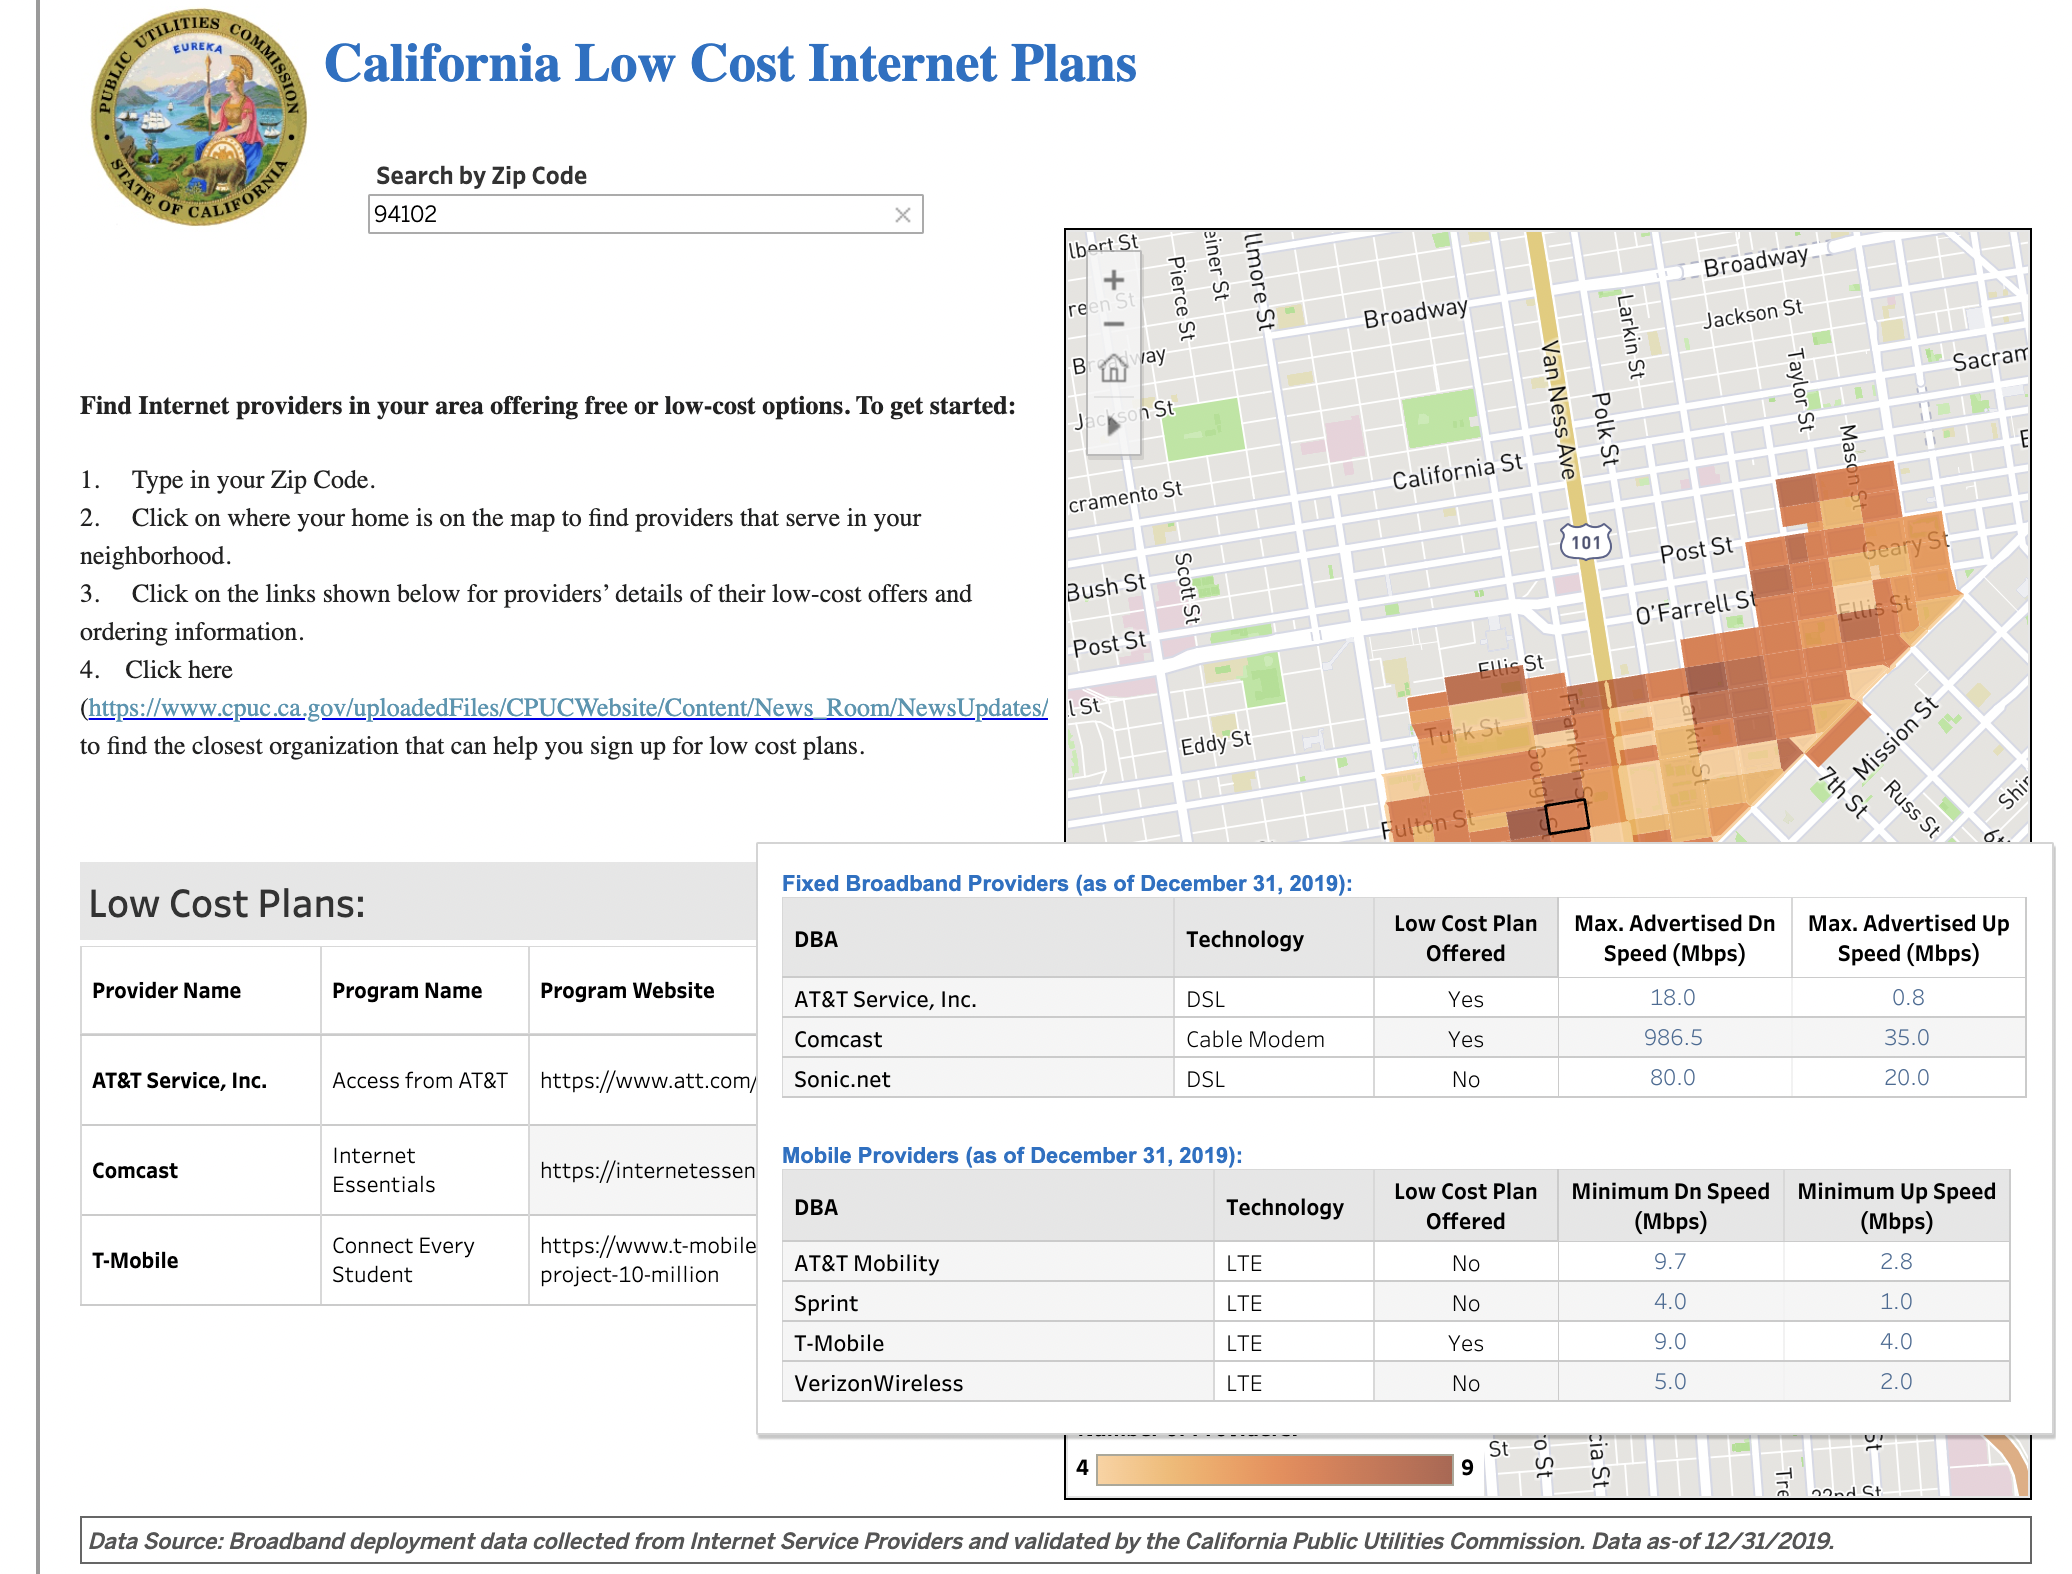 a screenshot of a map with degrees of color, showing which and how many low-cost internet providers are available in this neighborhood of San Francisco